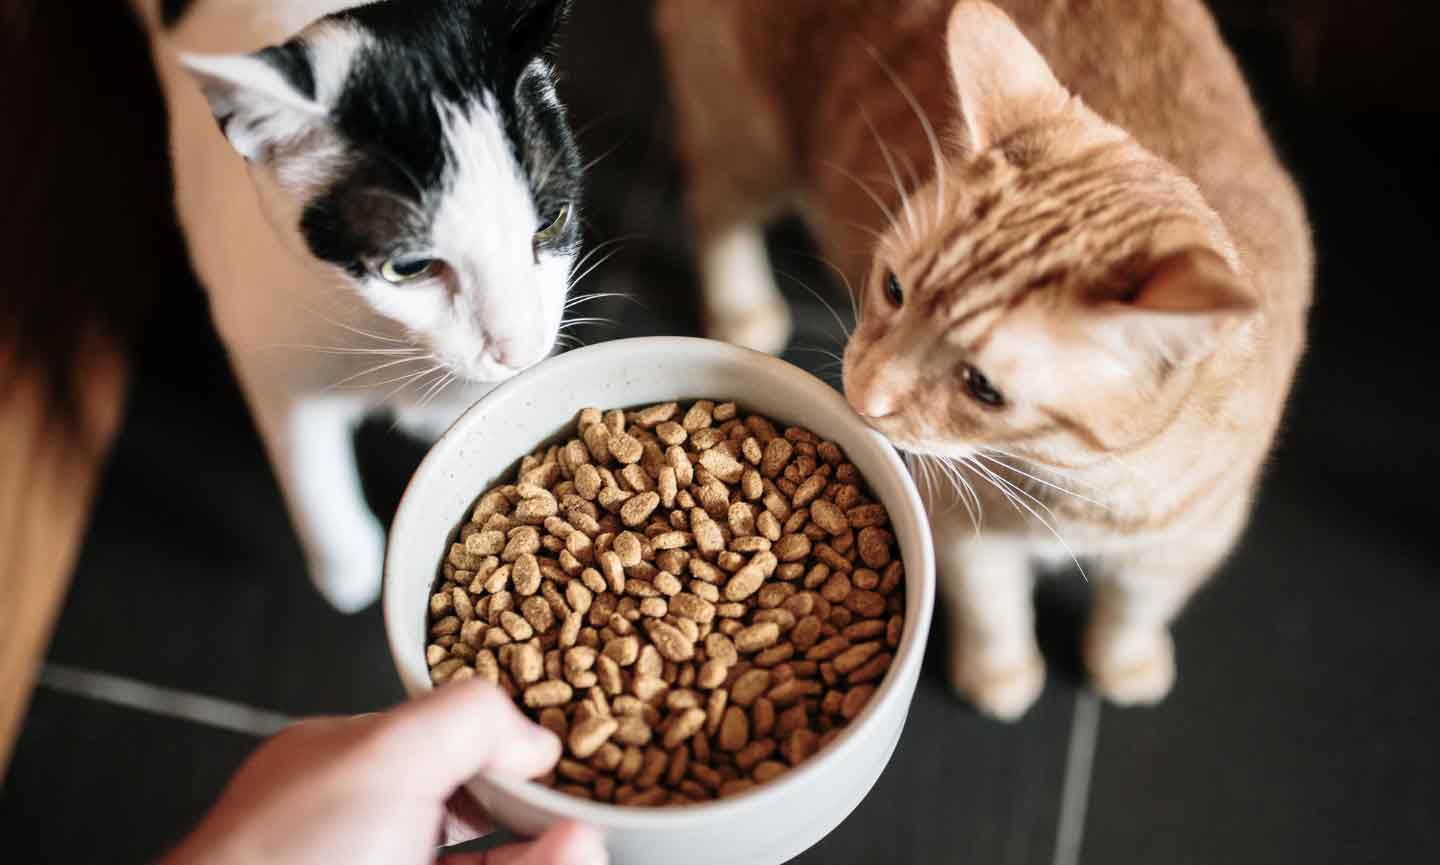 A hand lowering a bowl of cat food in front of two kittens